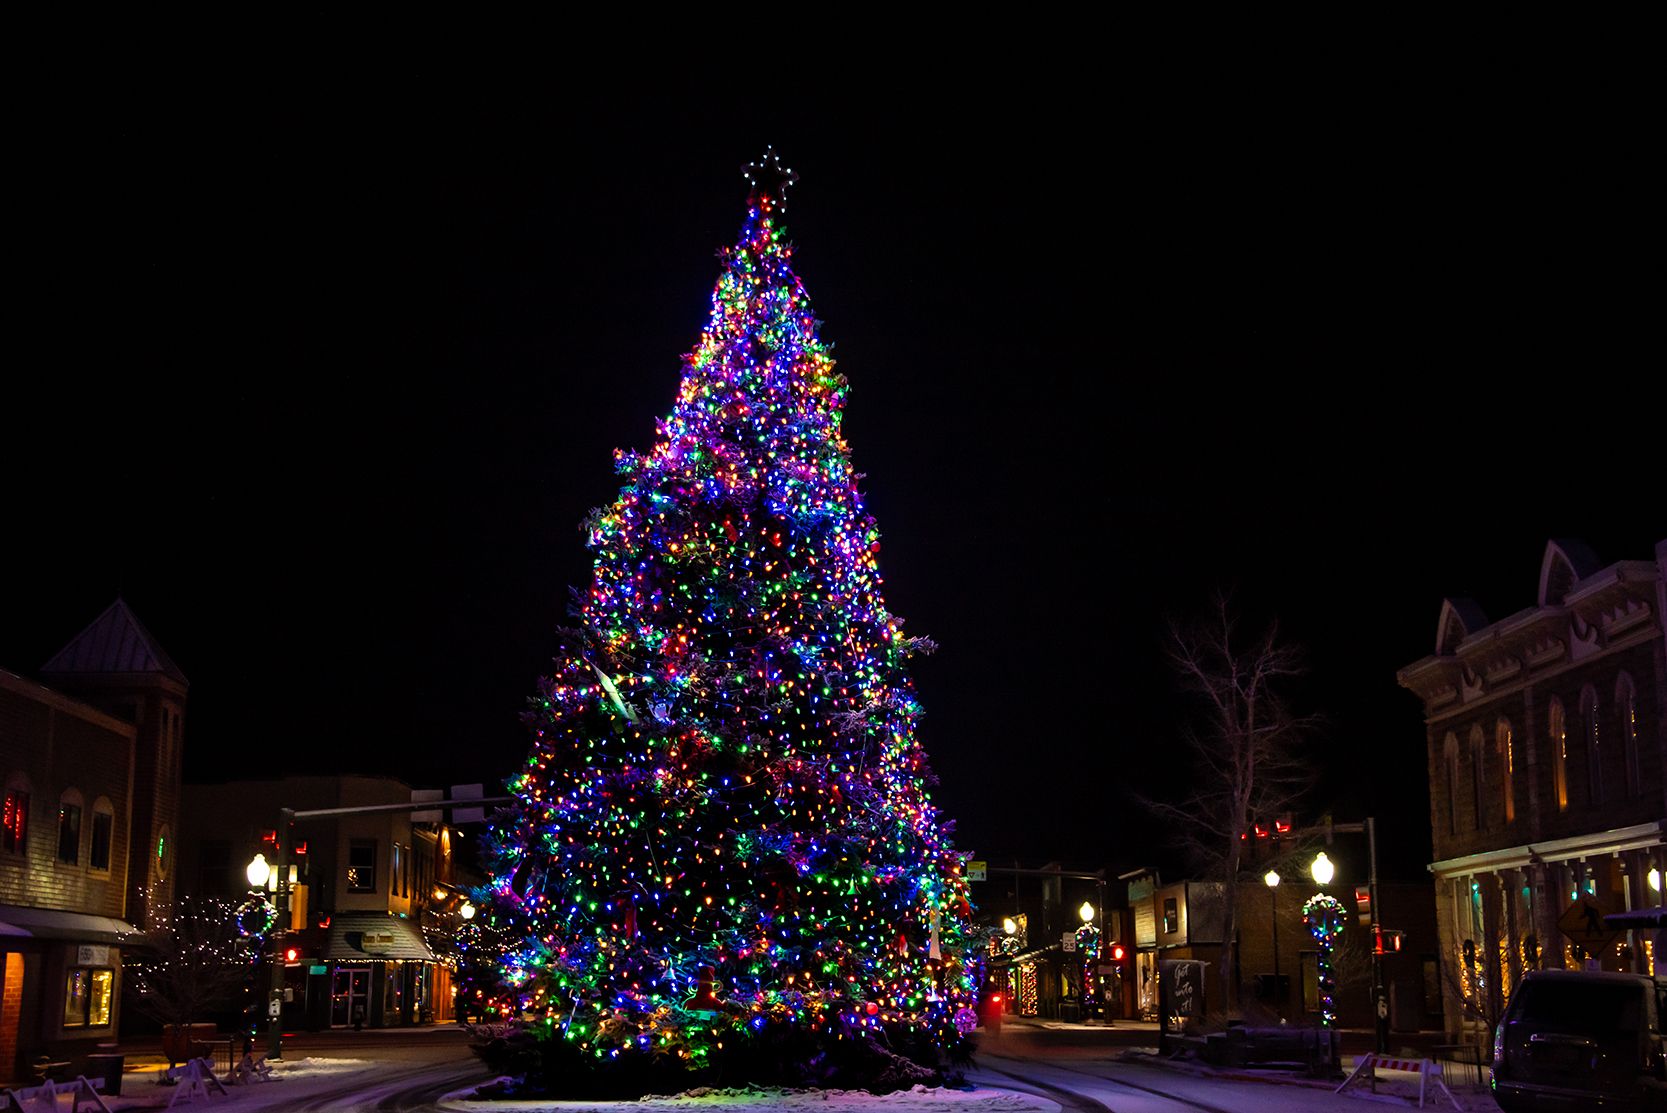 A 25-foot-tall Christmas tree is encrusted with colored lights that glow against the night sky.